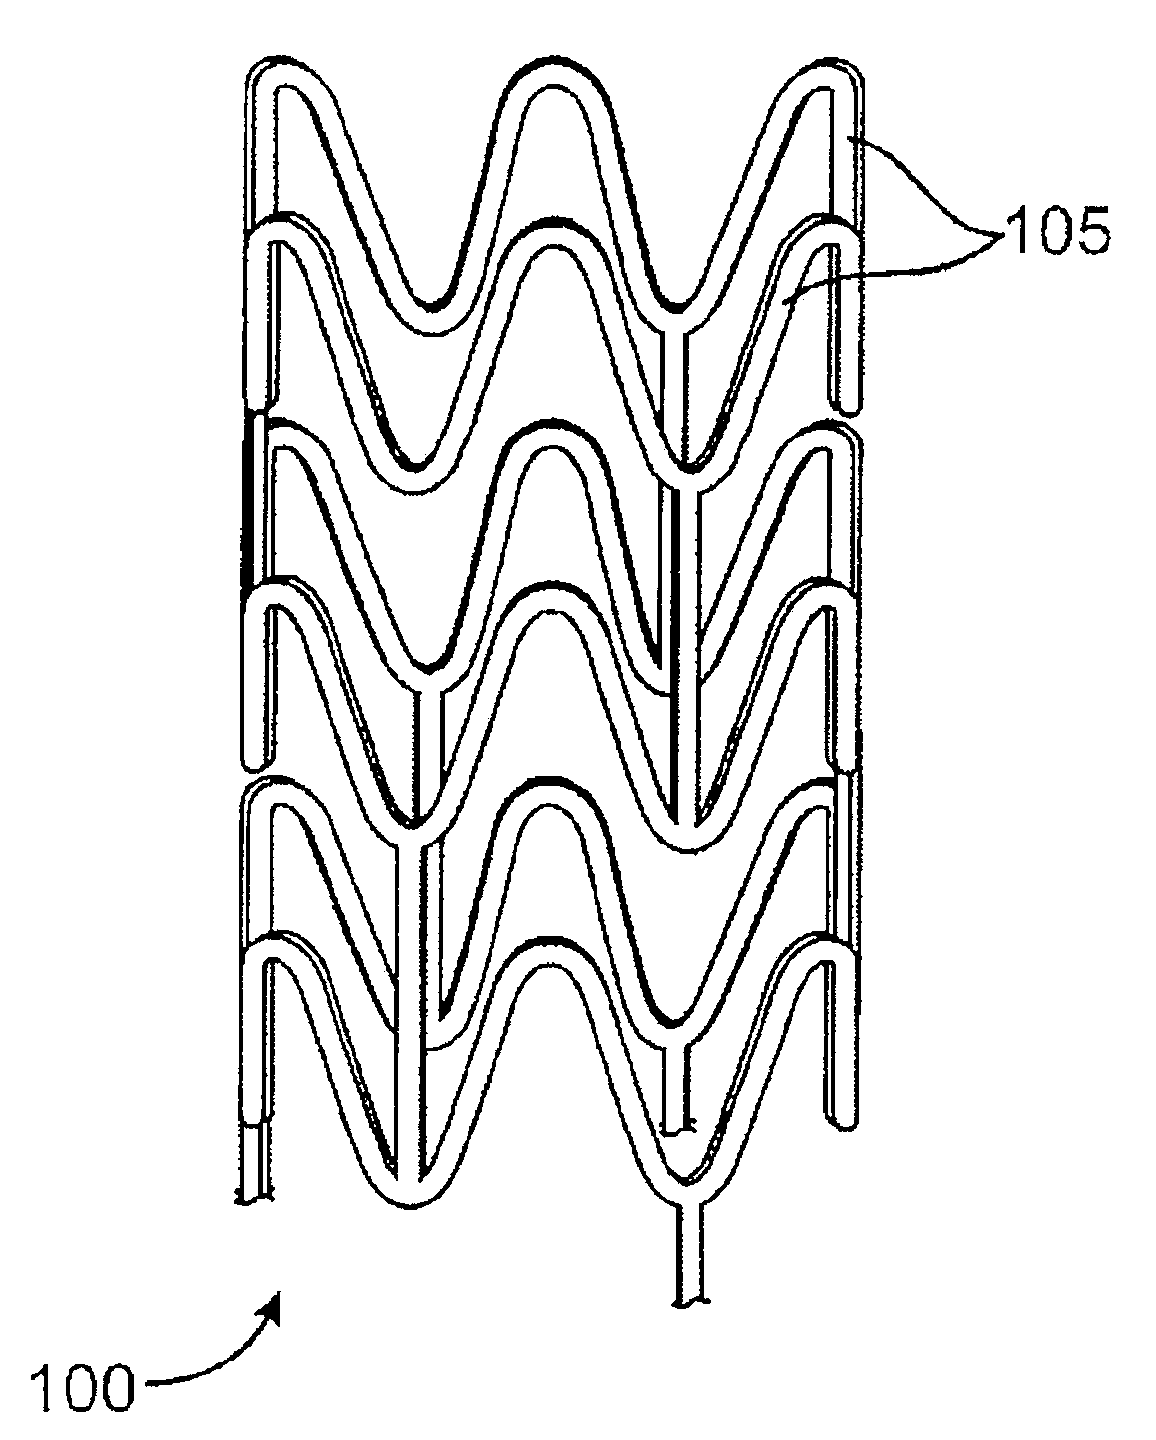 Stent Formed from Crosslinked Bioabsorbable Polymer and Methods of Making the Stent